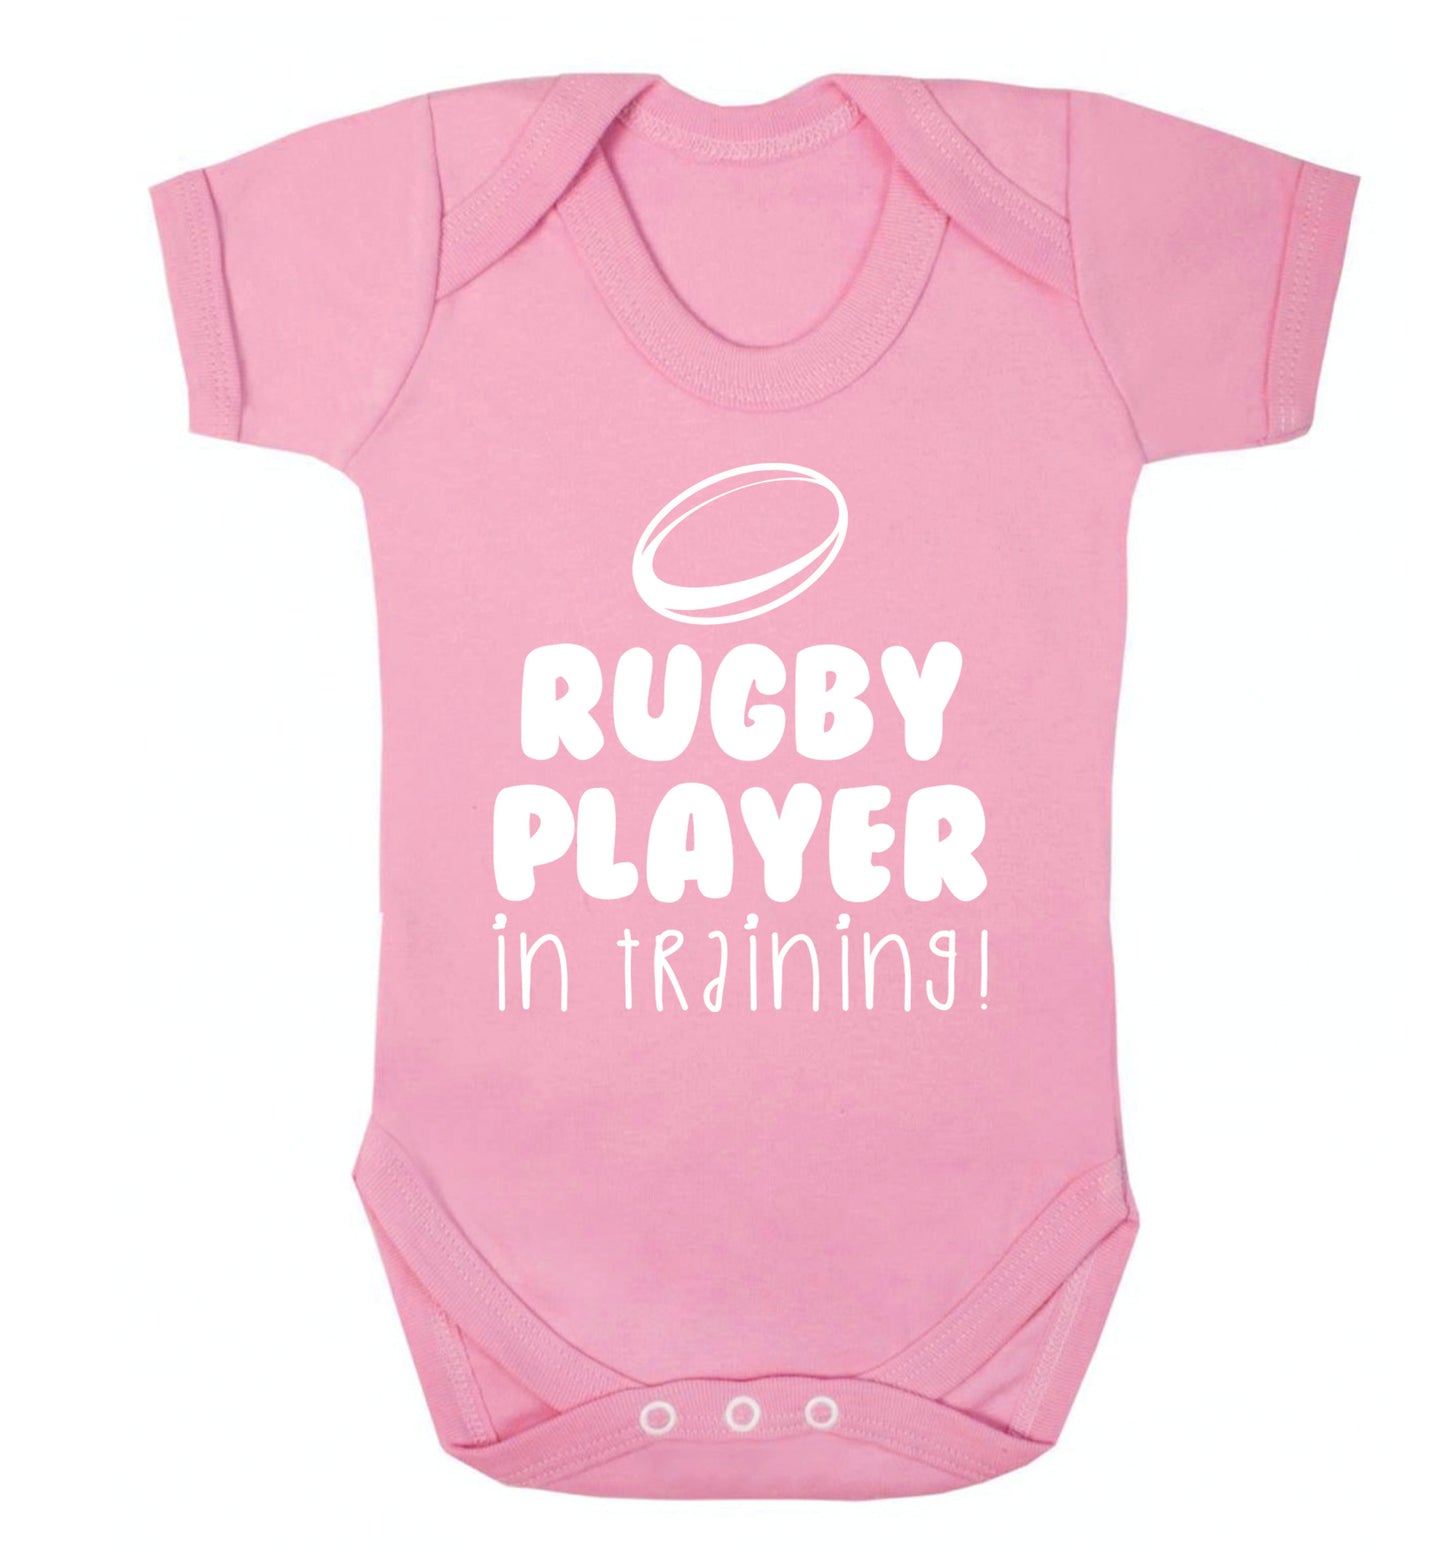 Rugby player in training Baby Vest pale pink 18-24 months